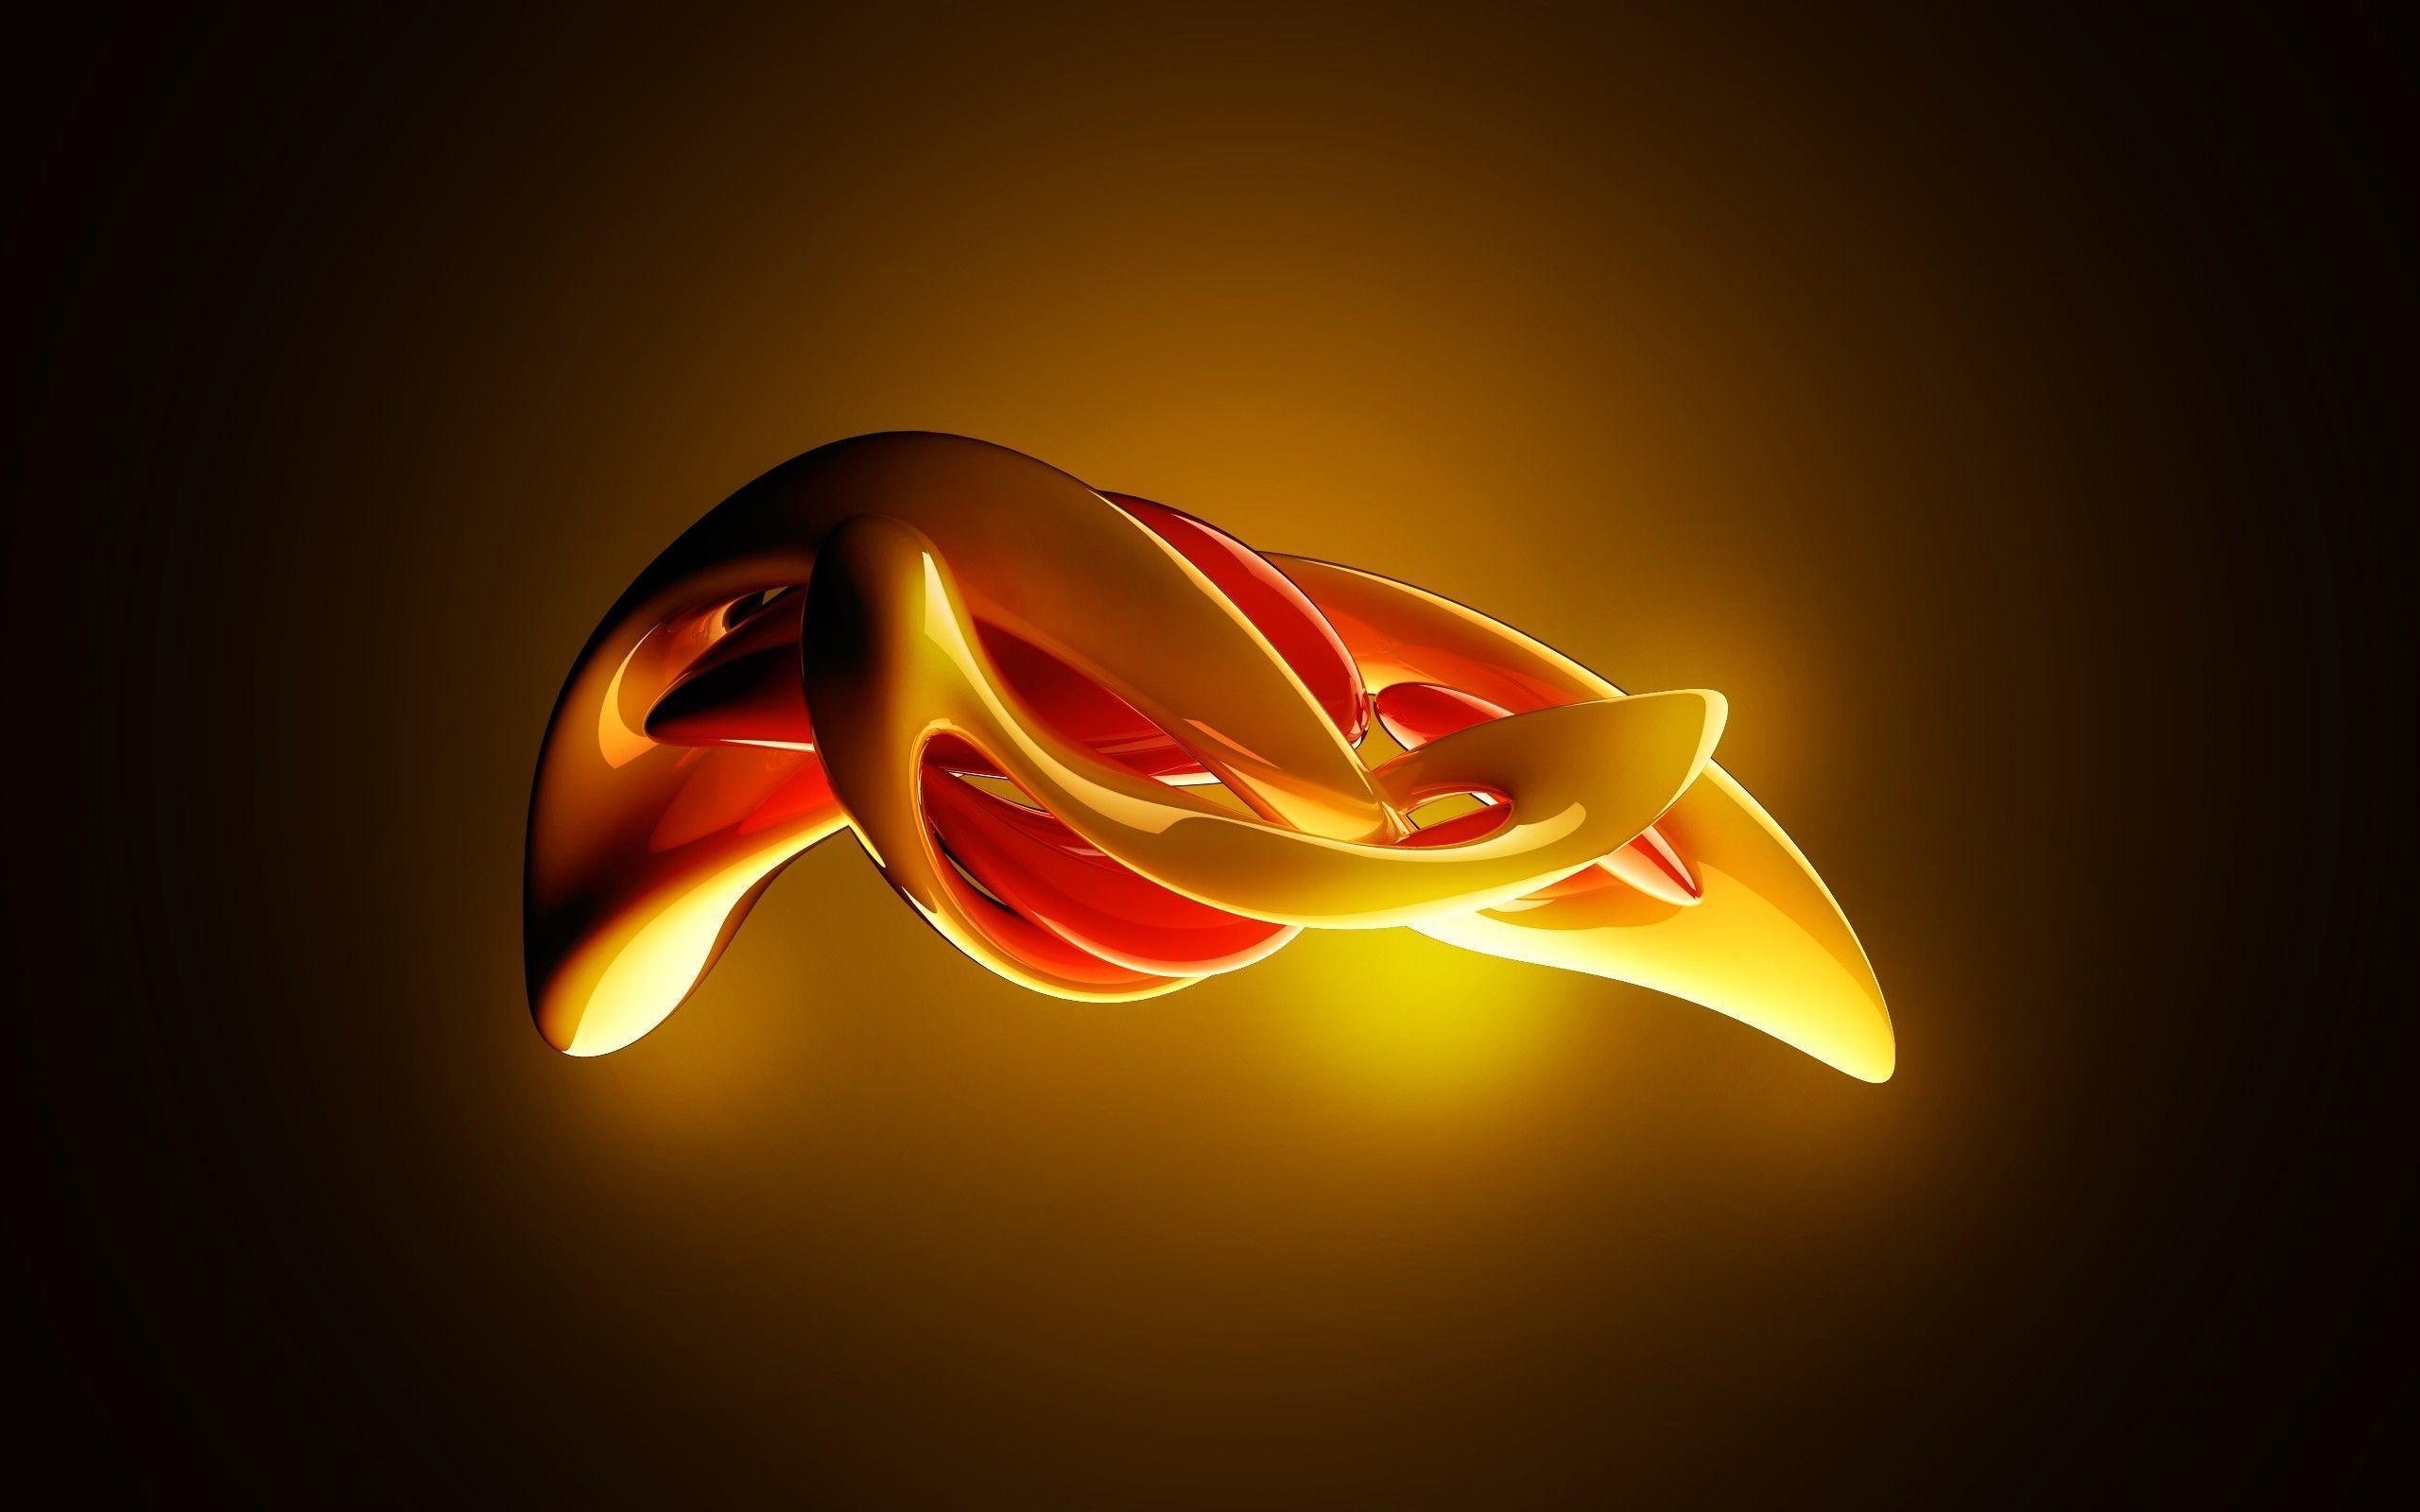 3D Gold Abstract Wallpaper Background Wallpaper. freehdwal